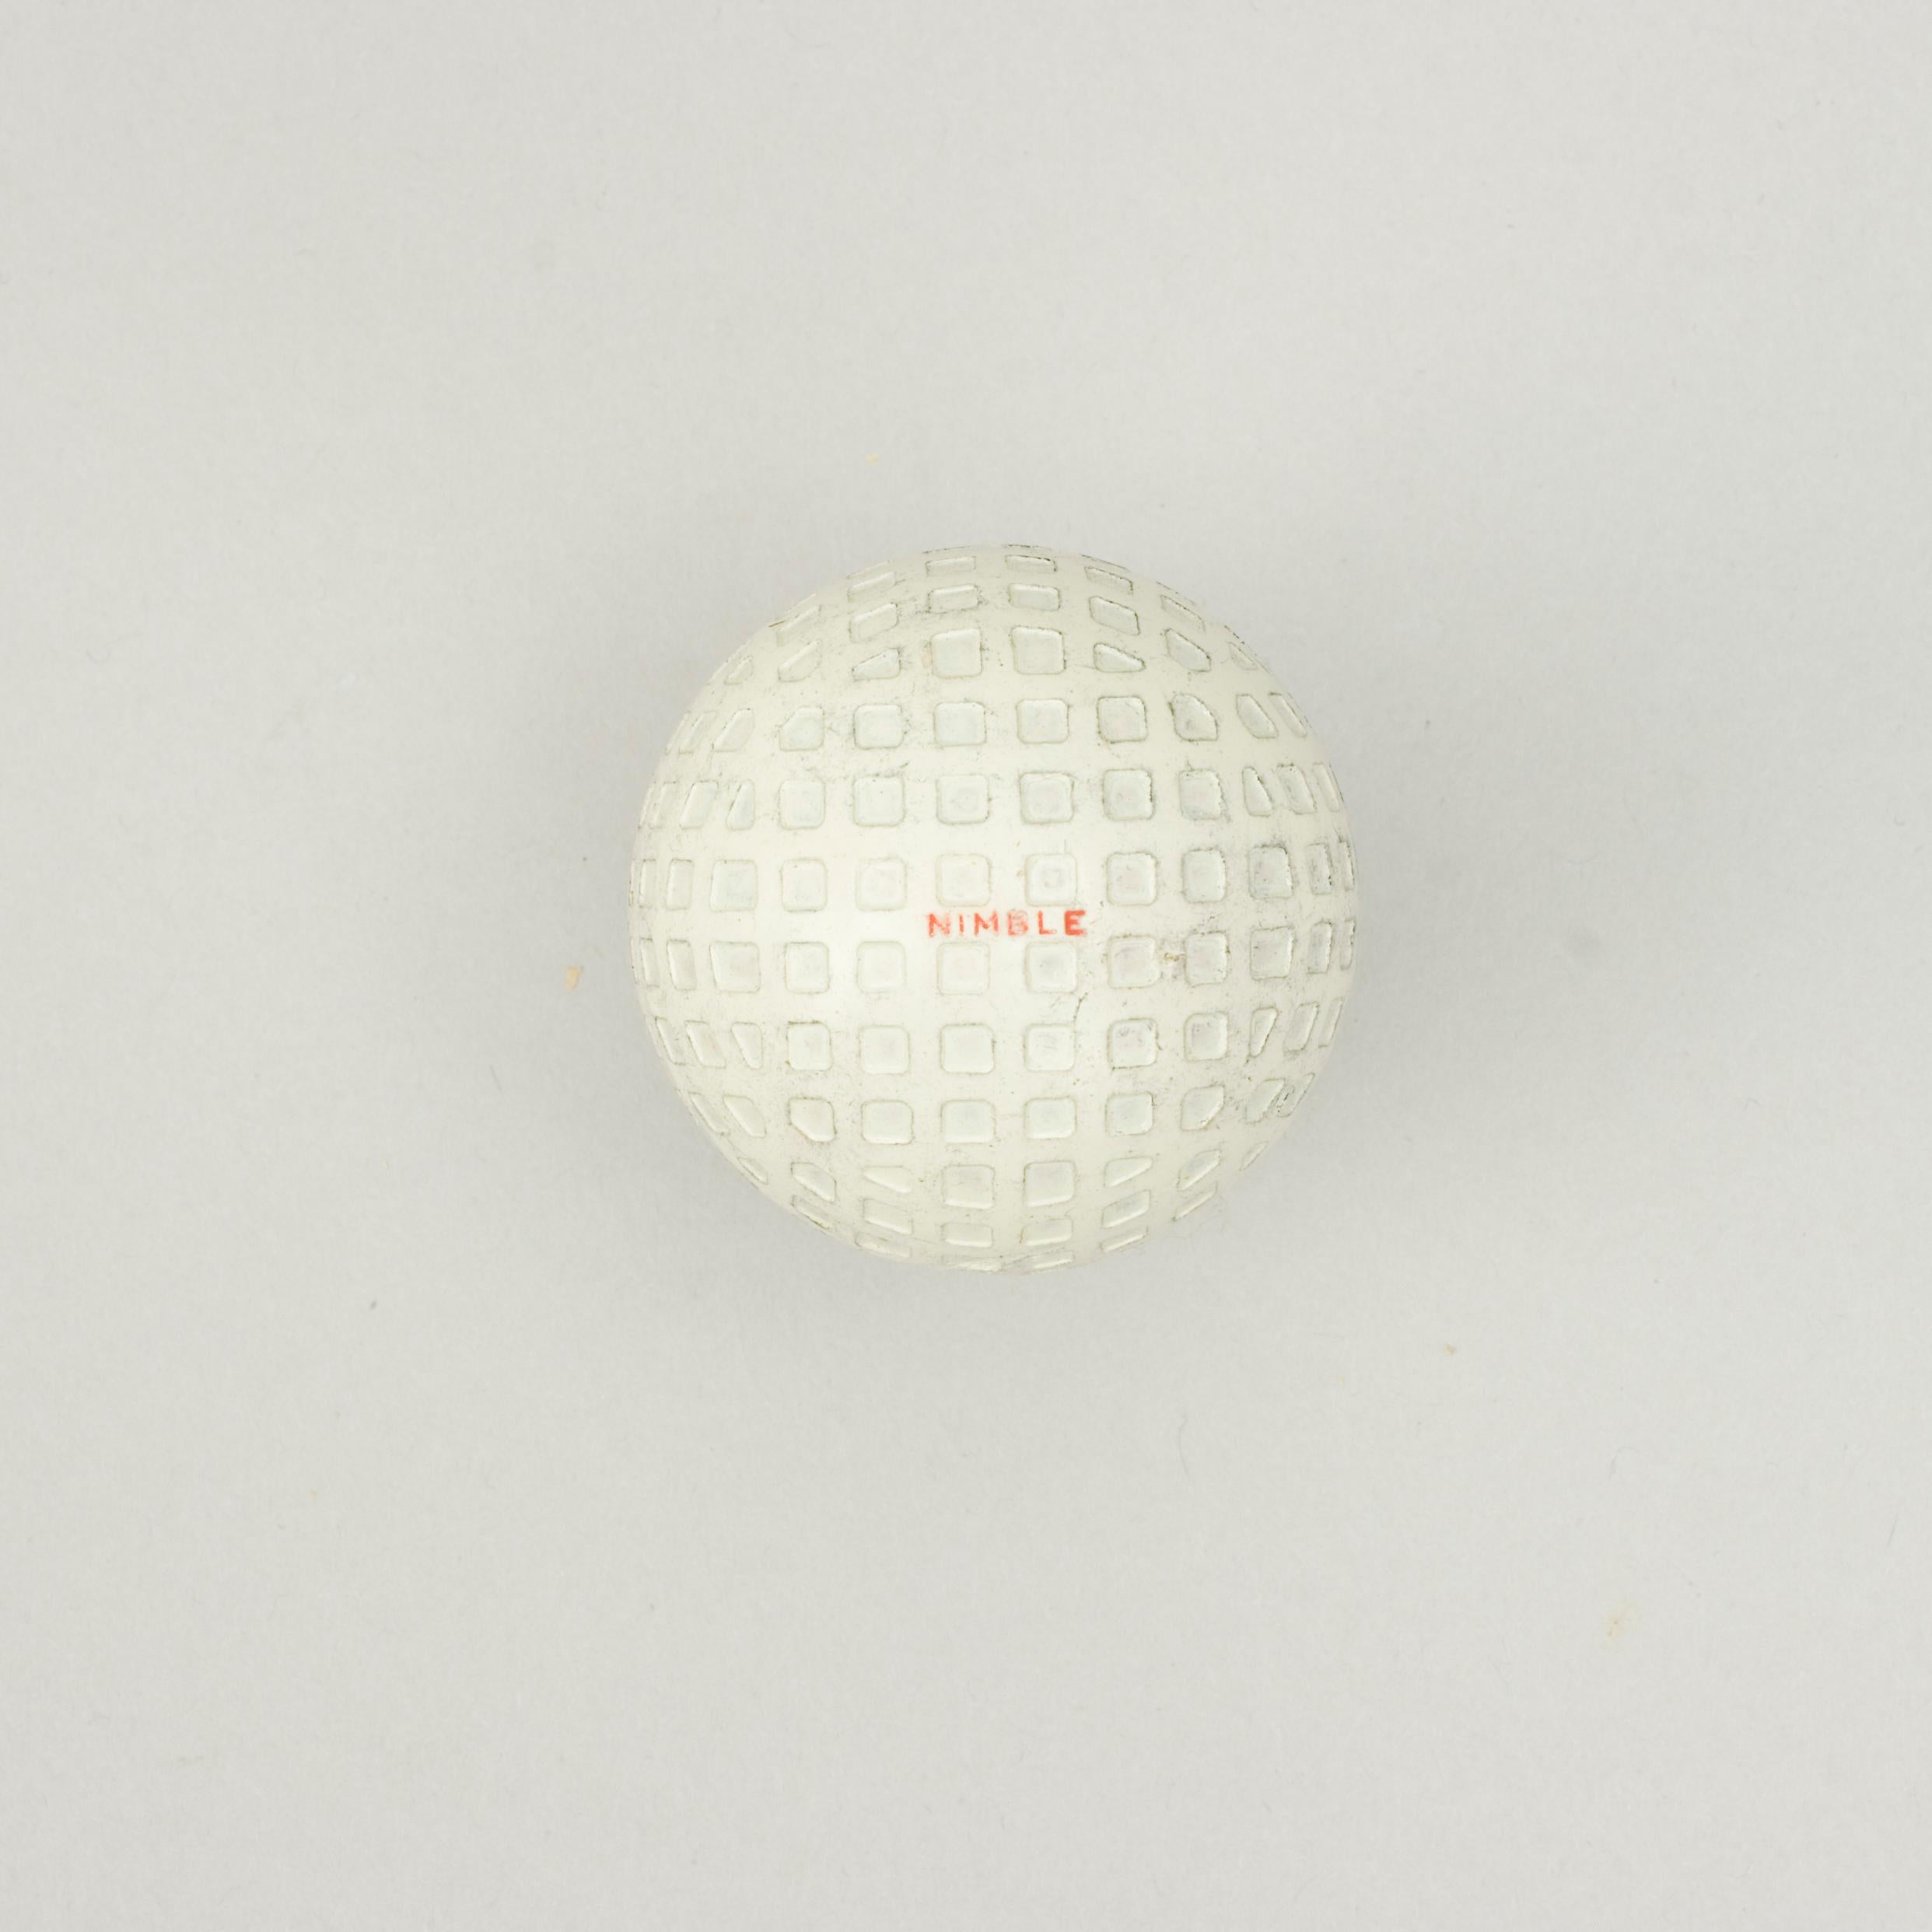 Spalding 'Nimble' Mesh Pattern Golf Ball.
A 1930's Spalding rubber core golf ball in very good condition. The ball has a square mesh or lattice pattern and is called 'Nimble'. The ball is marked 'Nimble' on both poles in red and is with a mesh